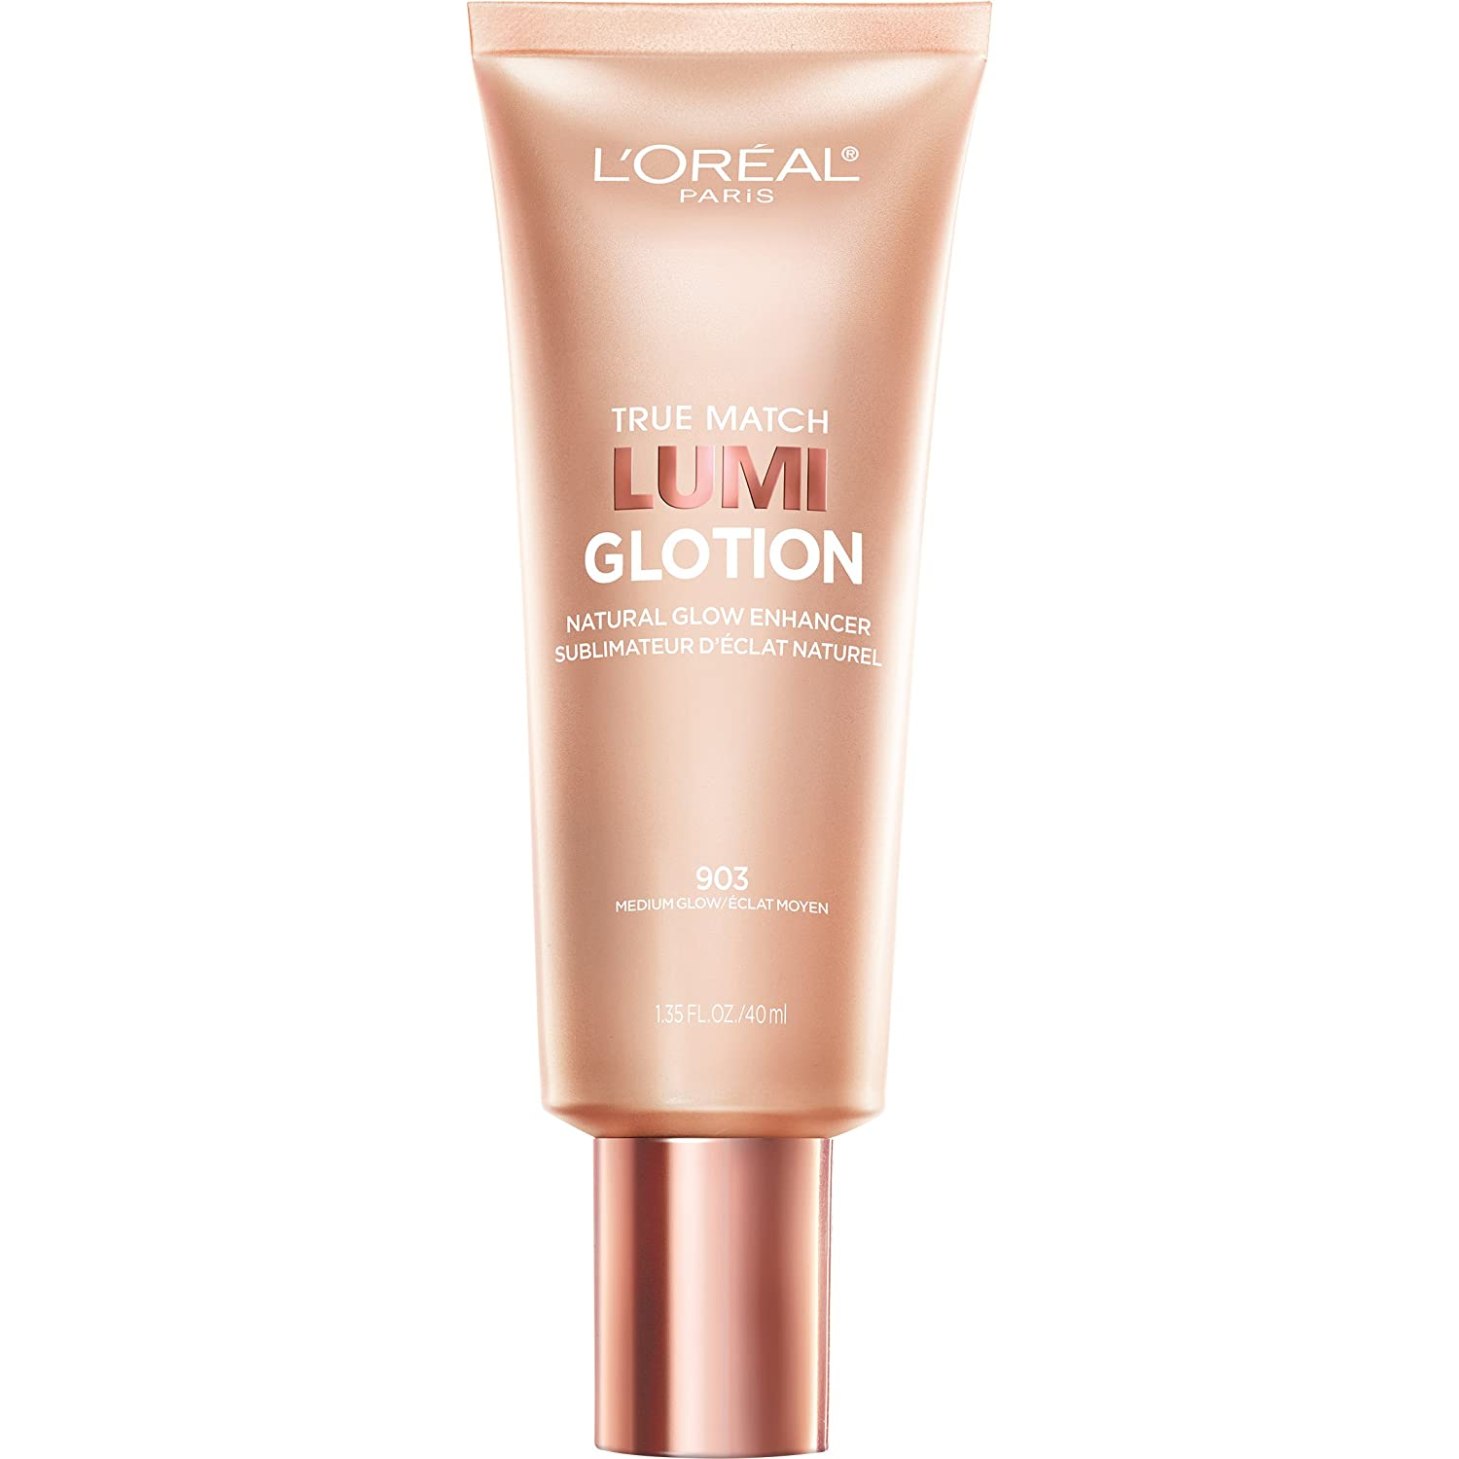 A bottle of L'Oreal Lumi Glotion foundation makeup.